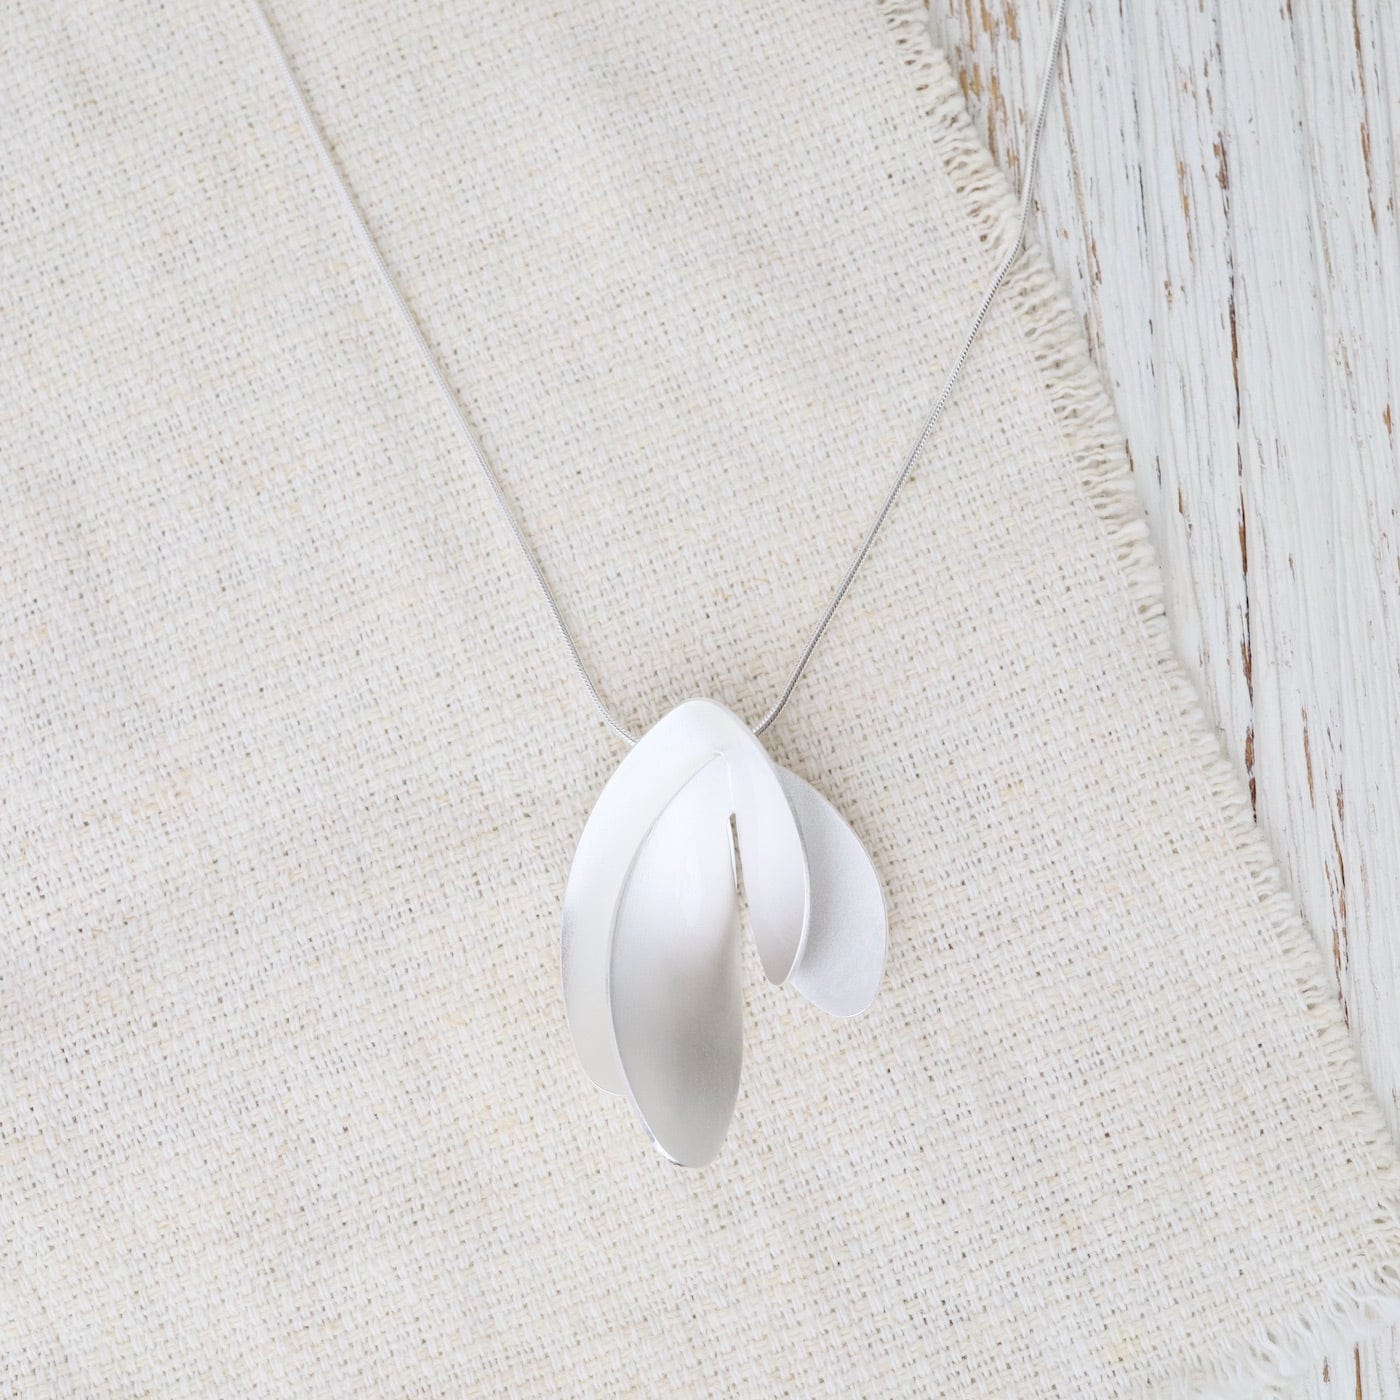 NKL Maple Seed Pendant Necklace